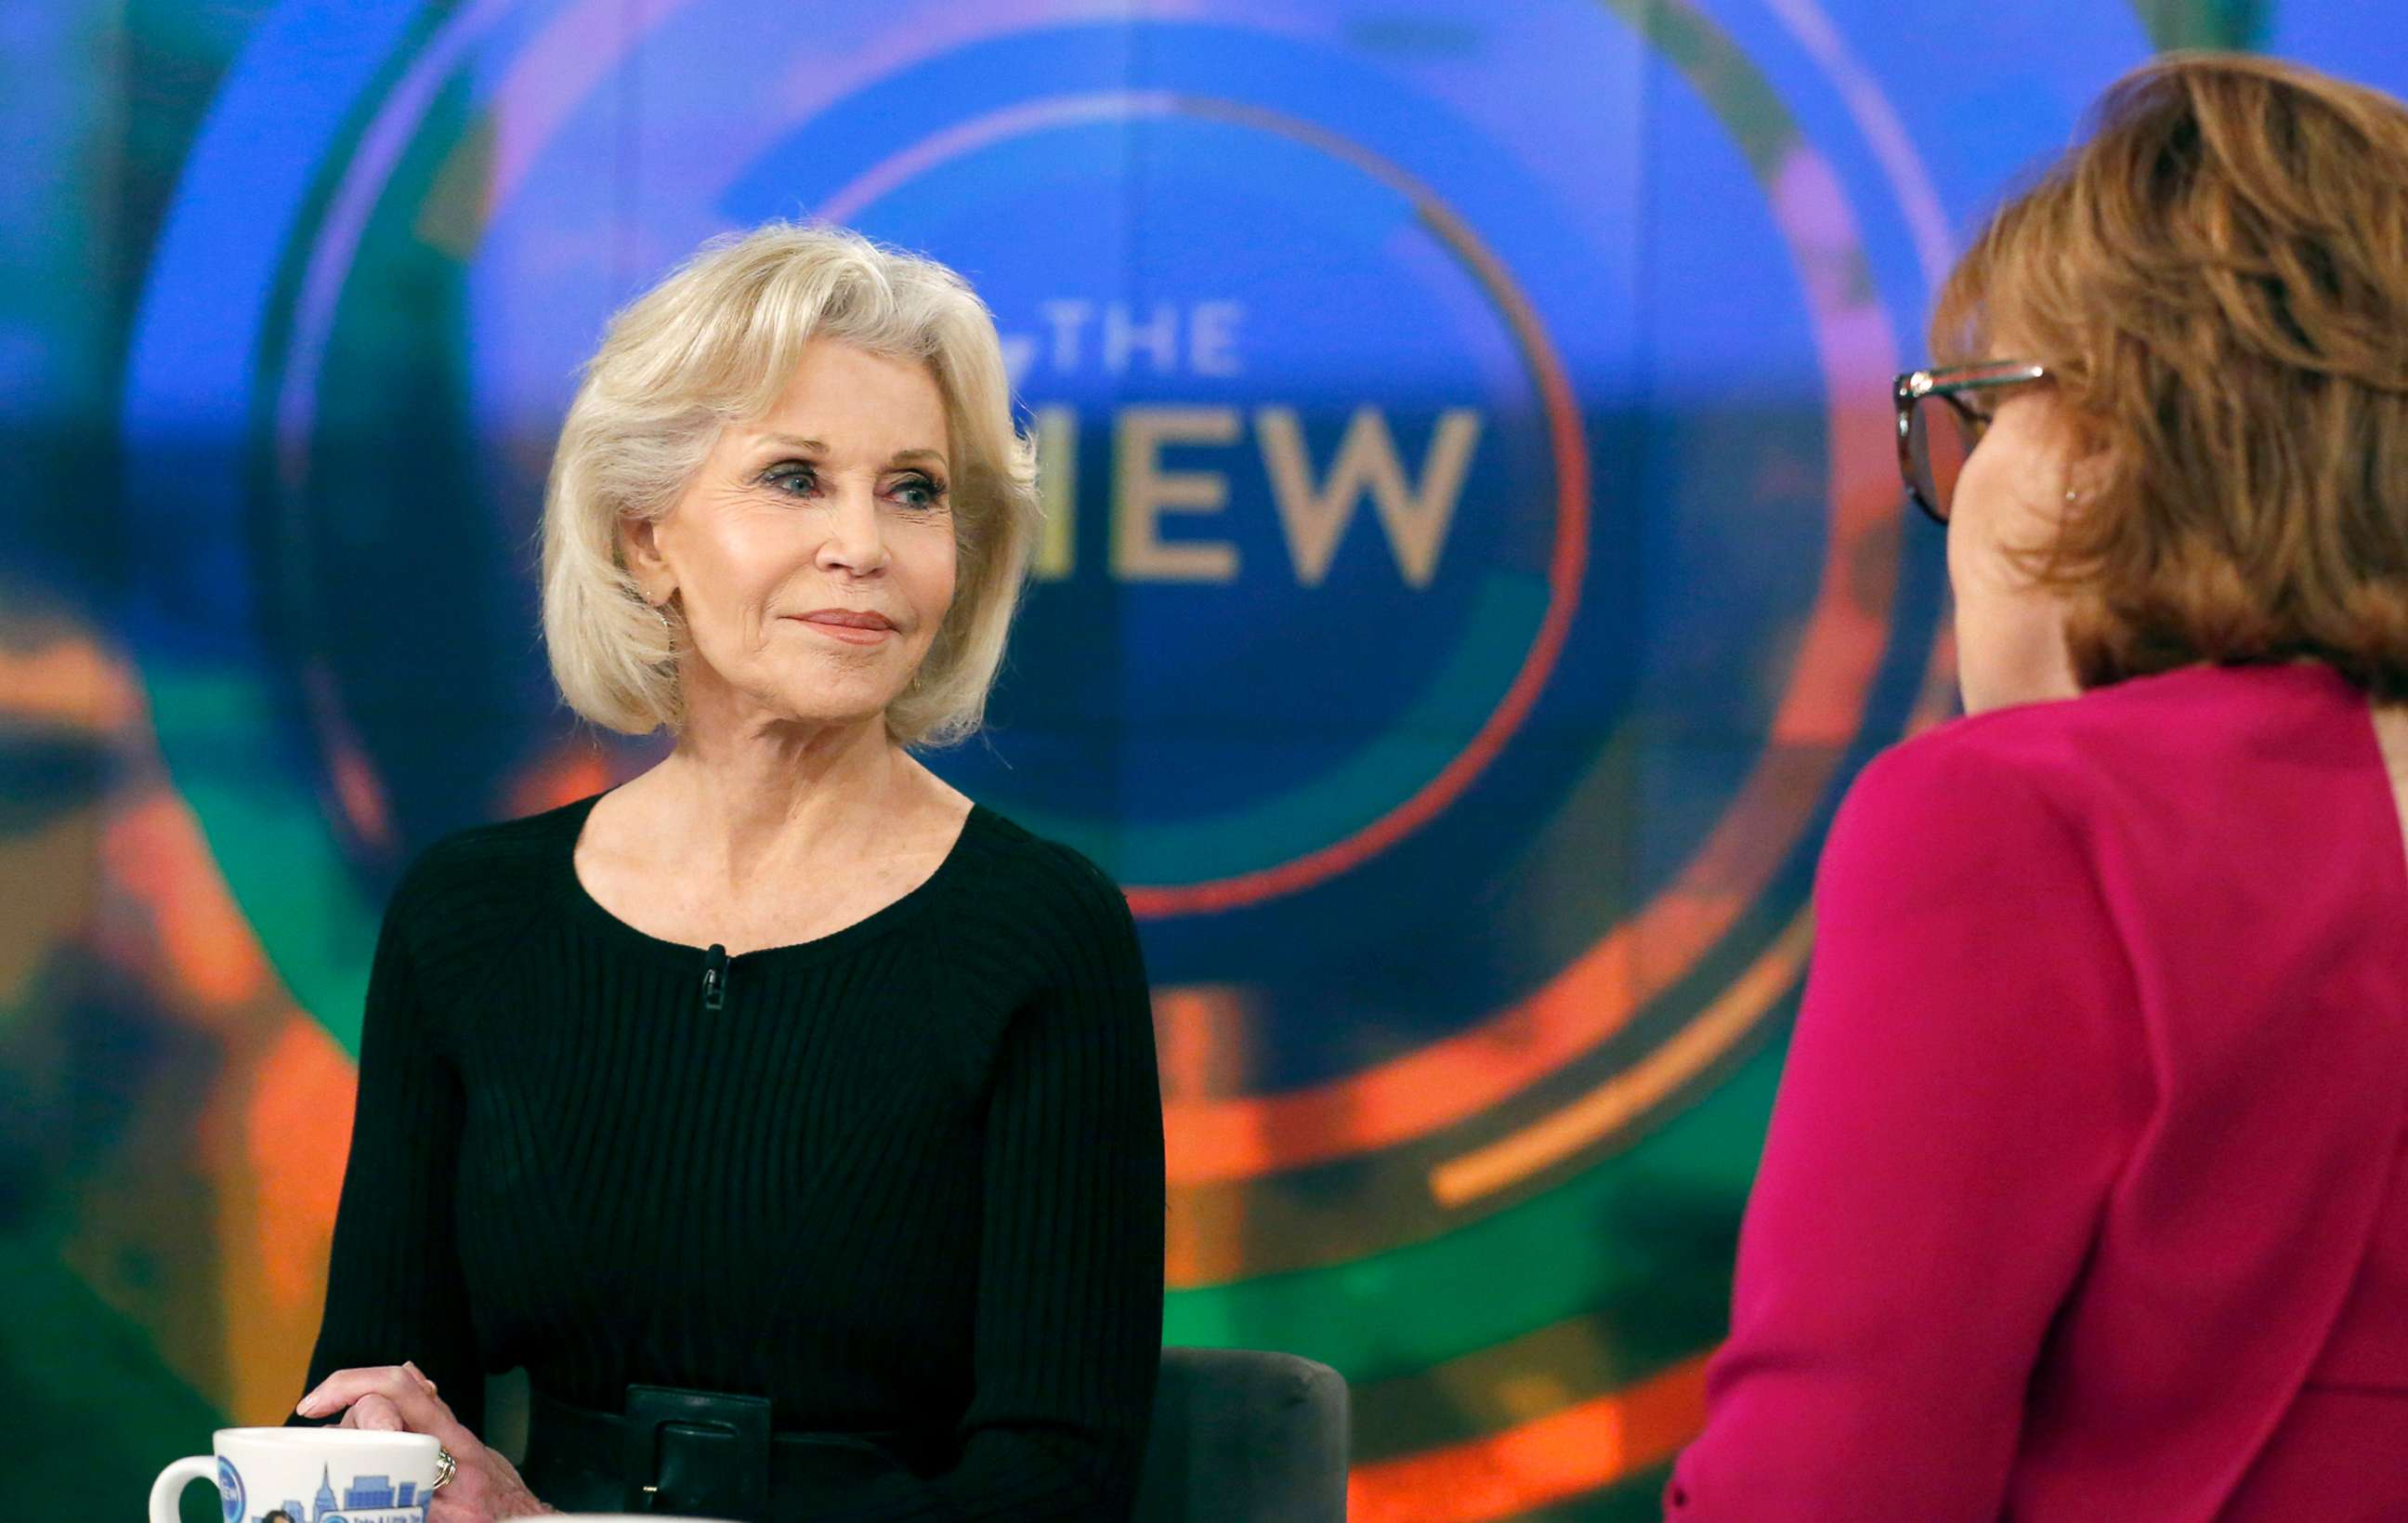 PHOTO: Actress Jane Fonda discusses her recent activism on Capitol Hill for environmental change during her appearance on "The View," Nov. 5, 2019.